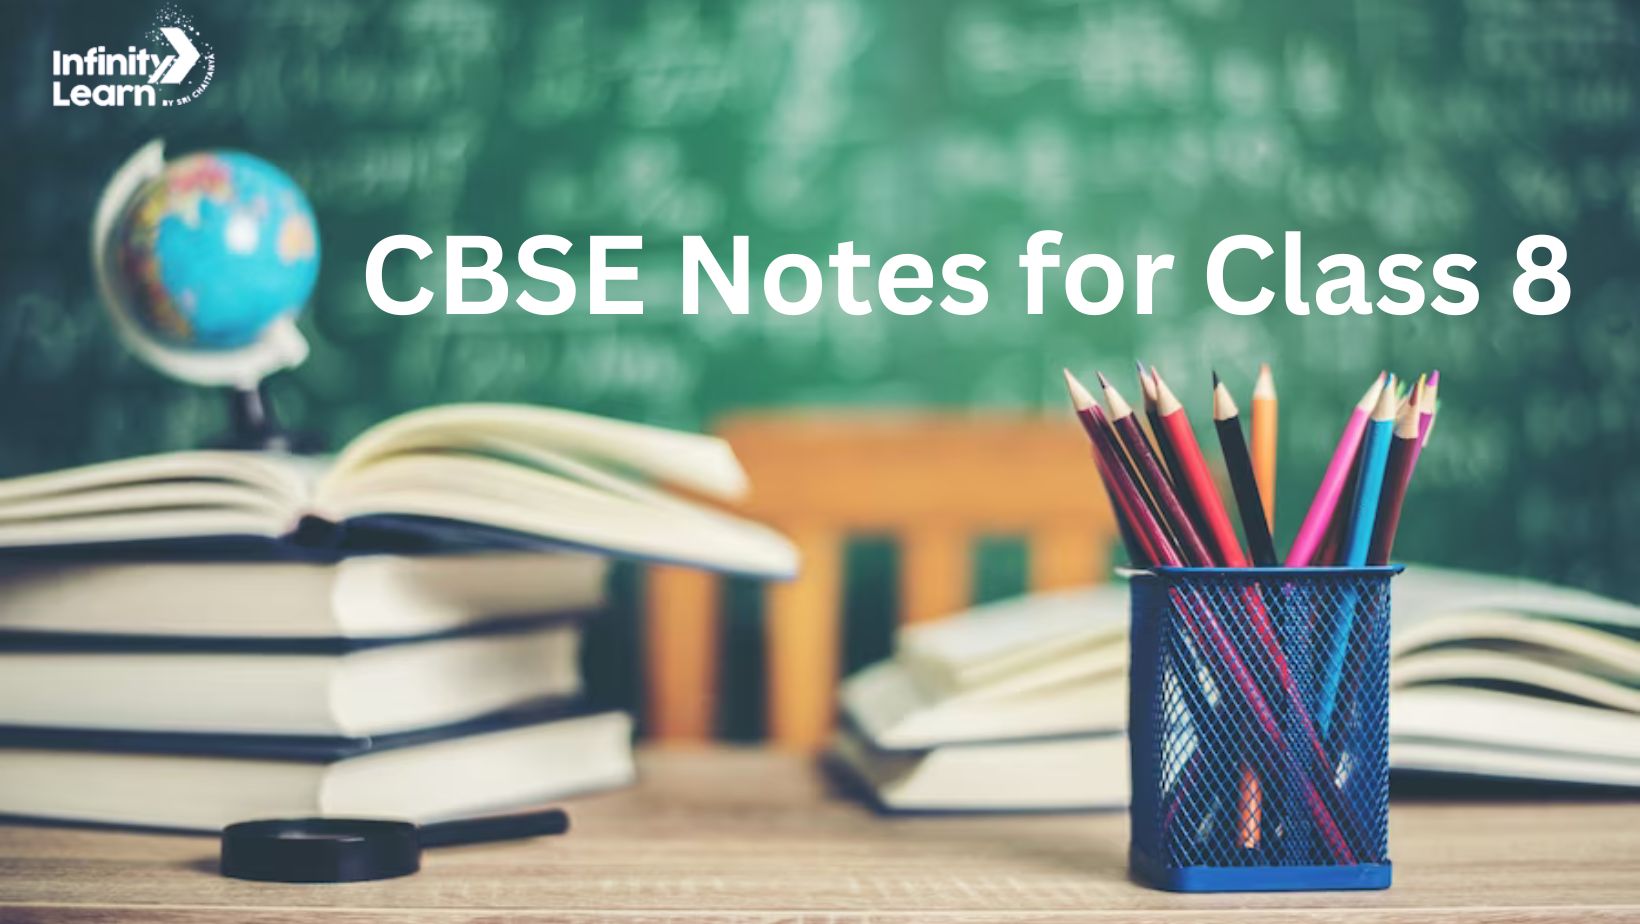 CBSE Notes for Class 8